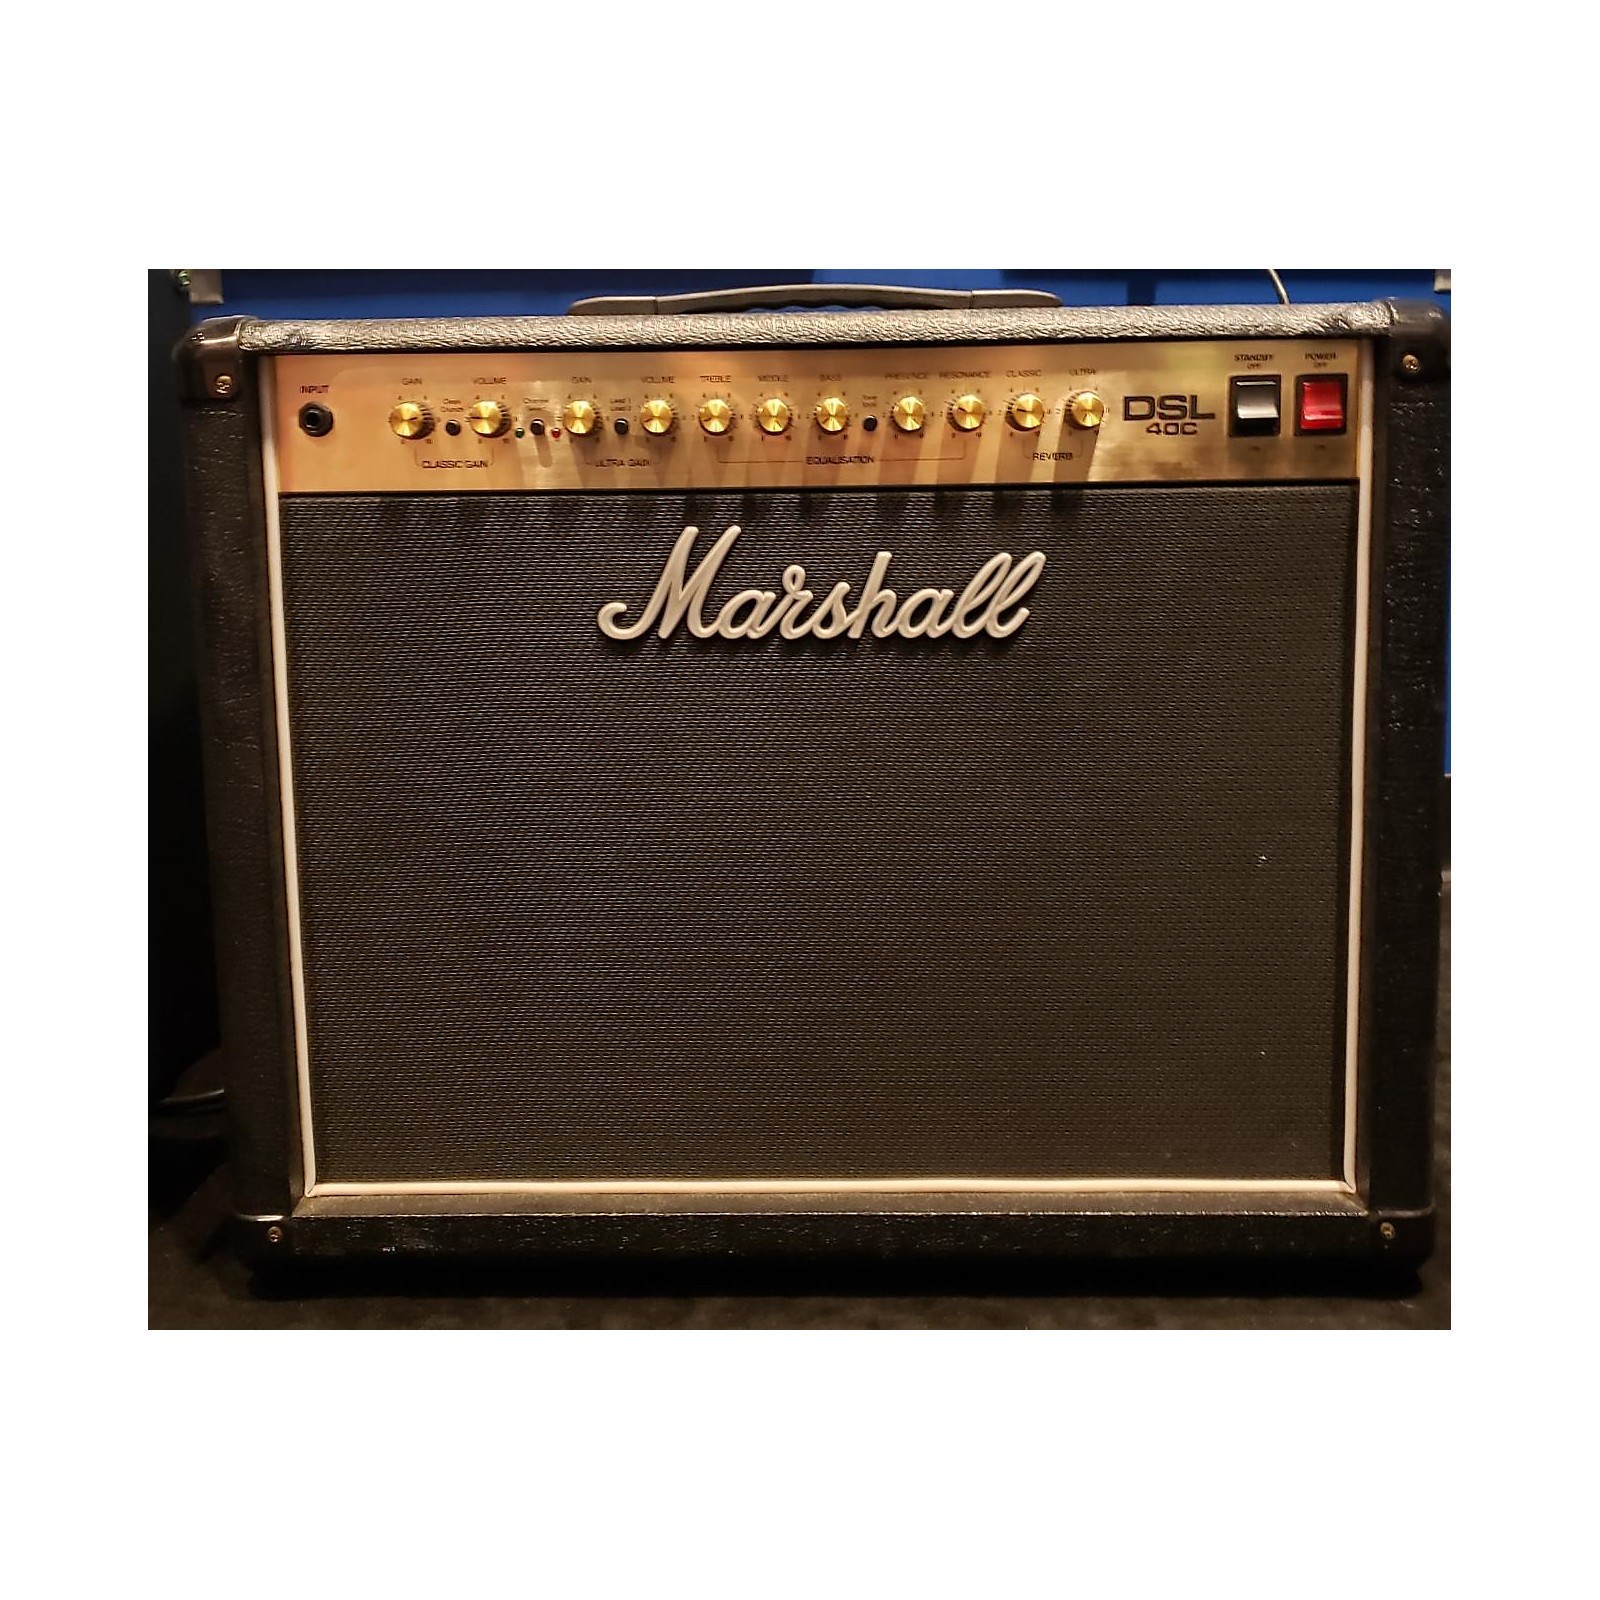 Used Marshall Dsl40c 40w 1x12 Tube Guitar Combo Amp Musicians Friend